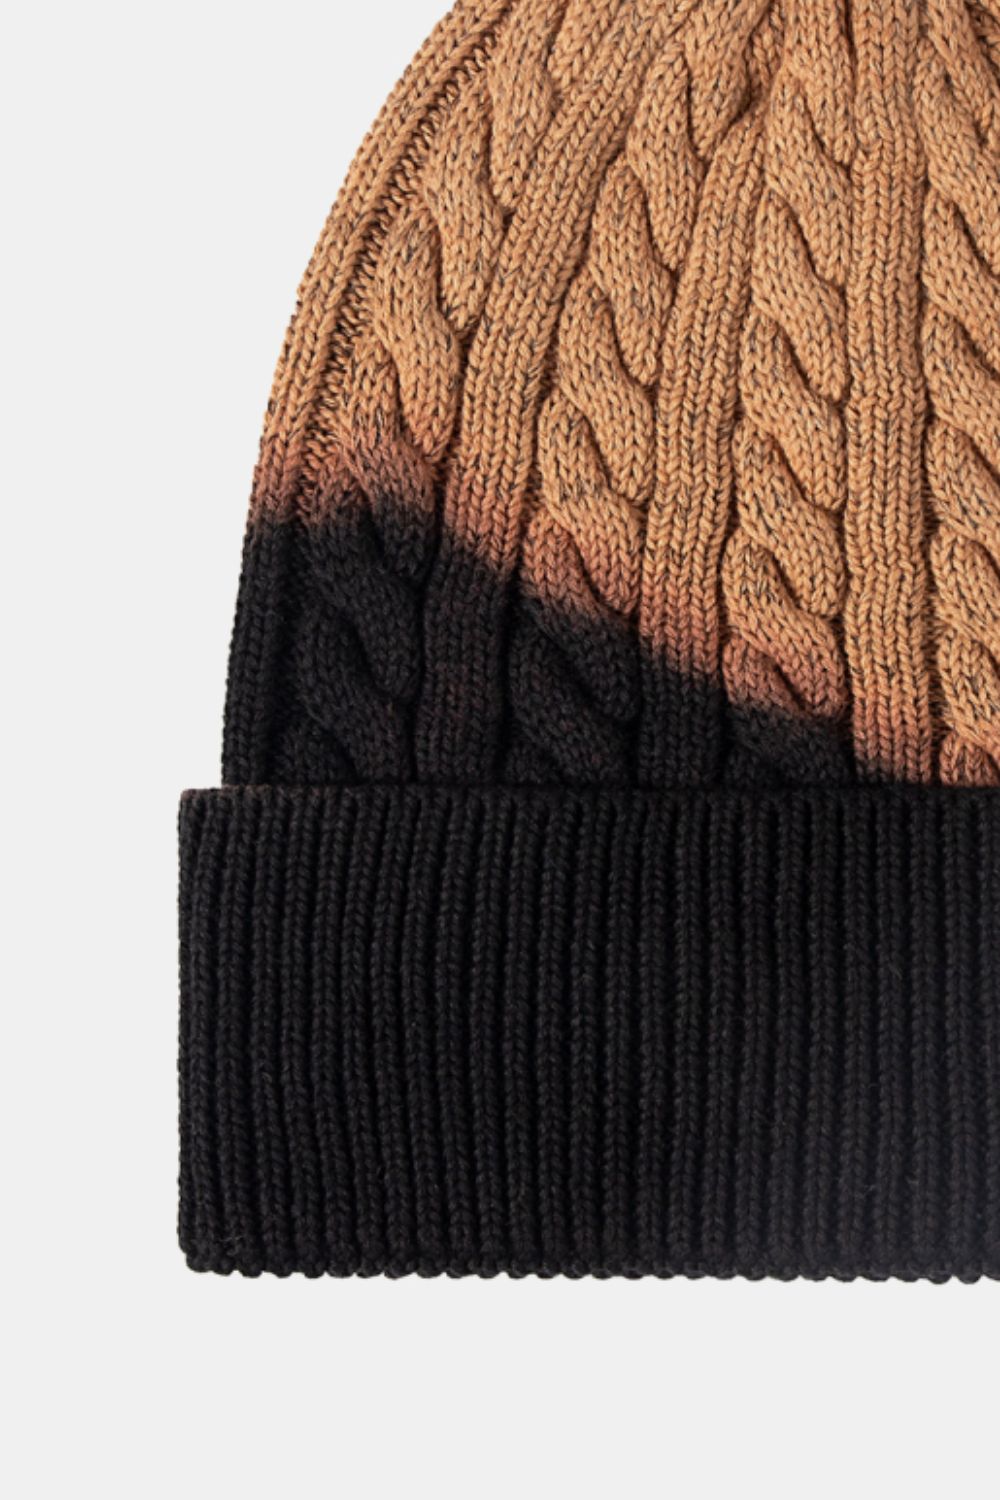 Sienna Contrast Tie-Dye Cable-Knit Cuffed Beanie Sentient Beauty Fashions *Accessories